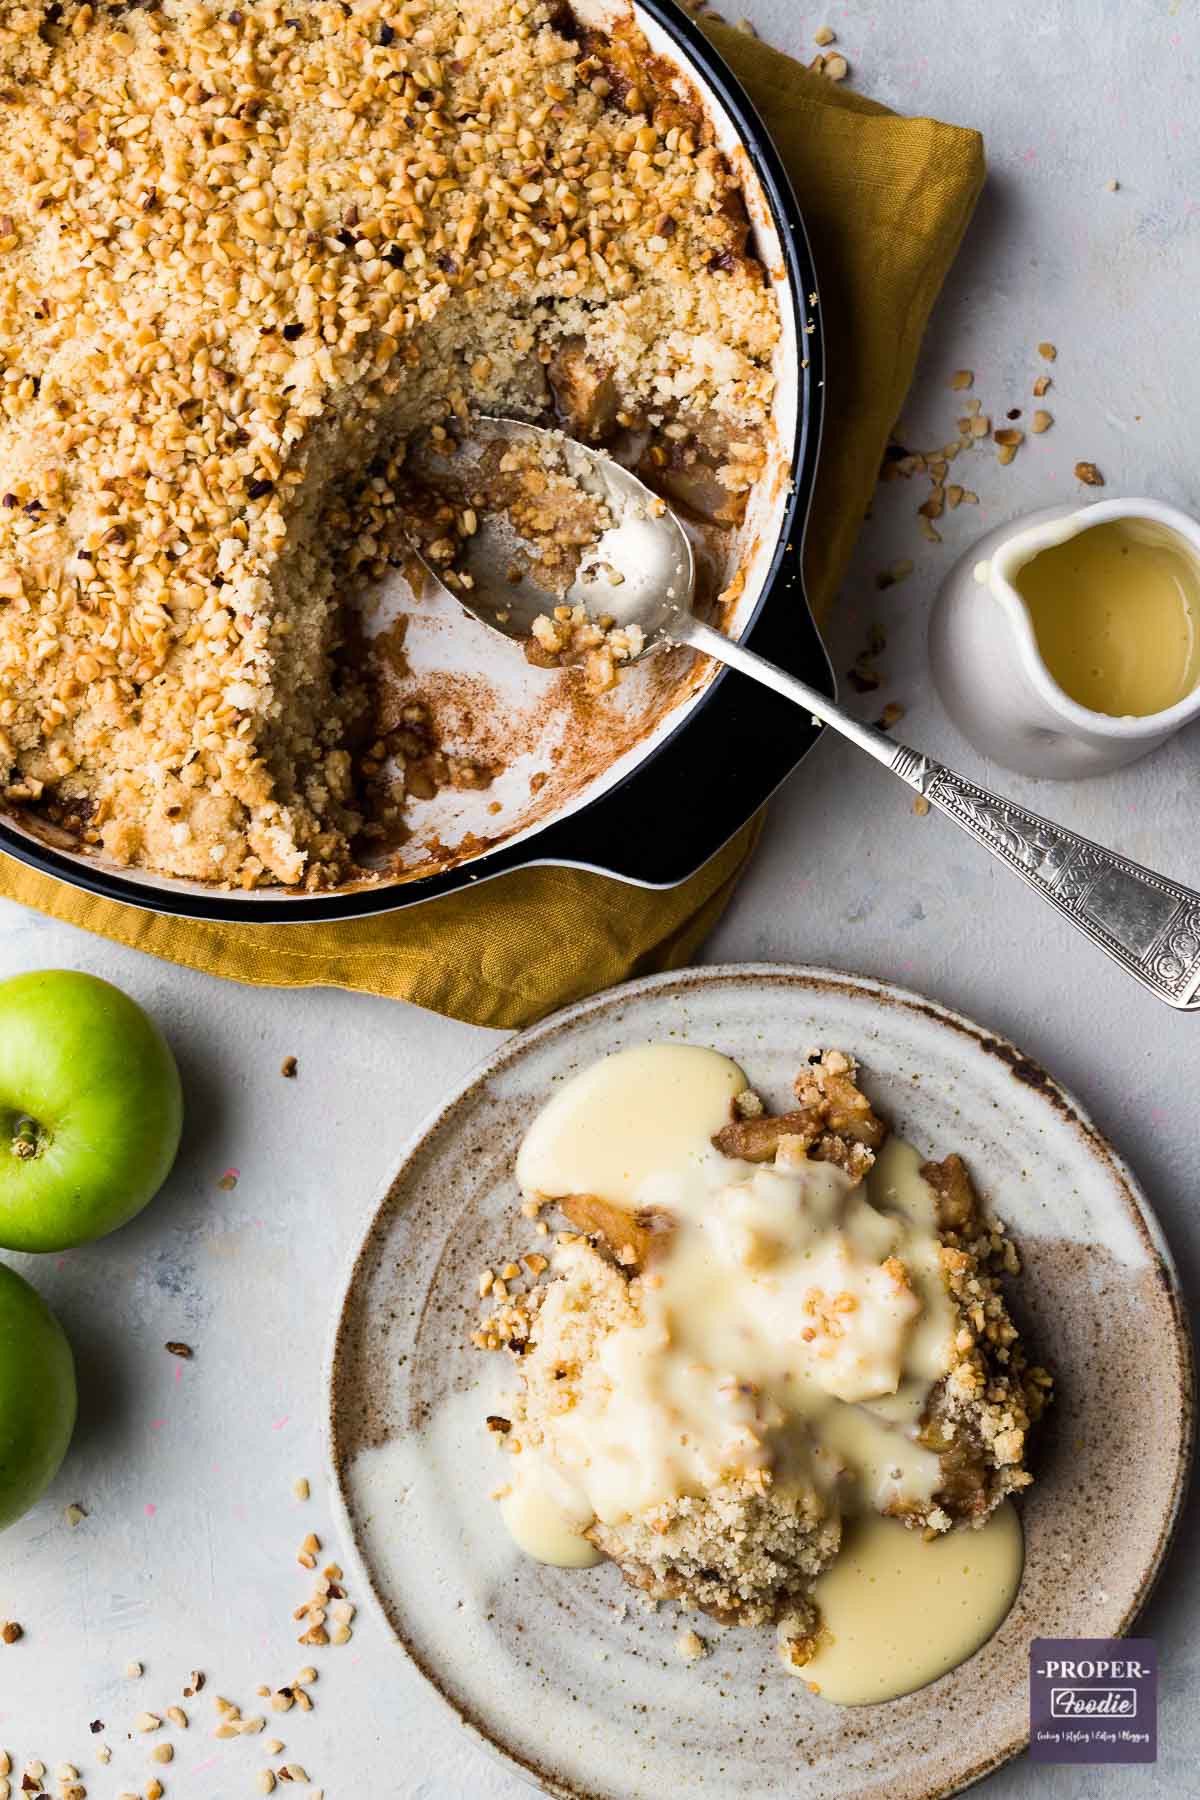 A portion of apply crumble on a small plate with custard drizzled over and the rest of the crumble in a larger dish with a spoon.